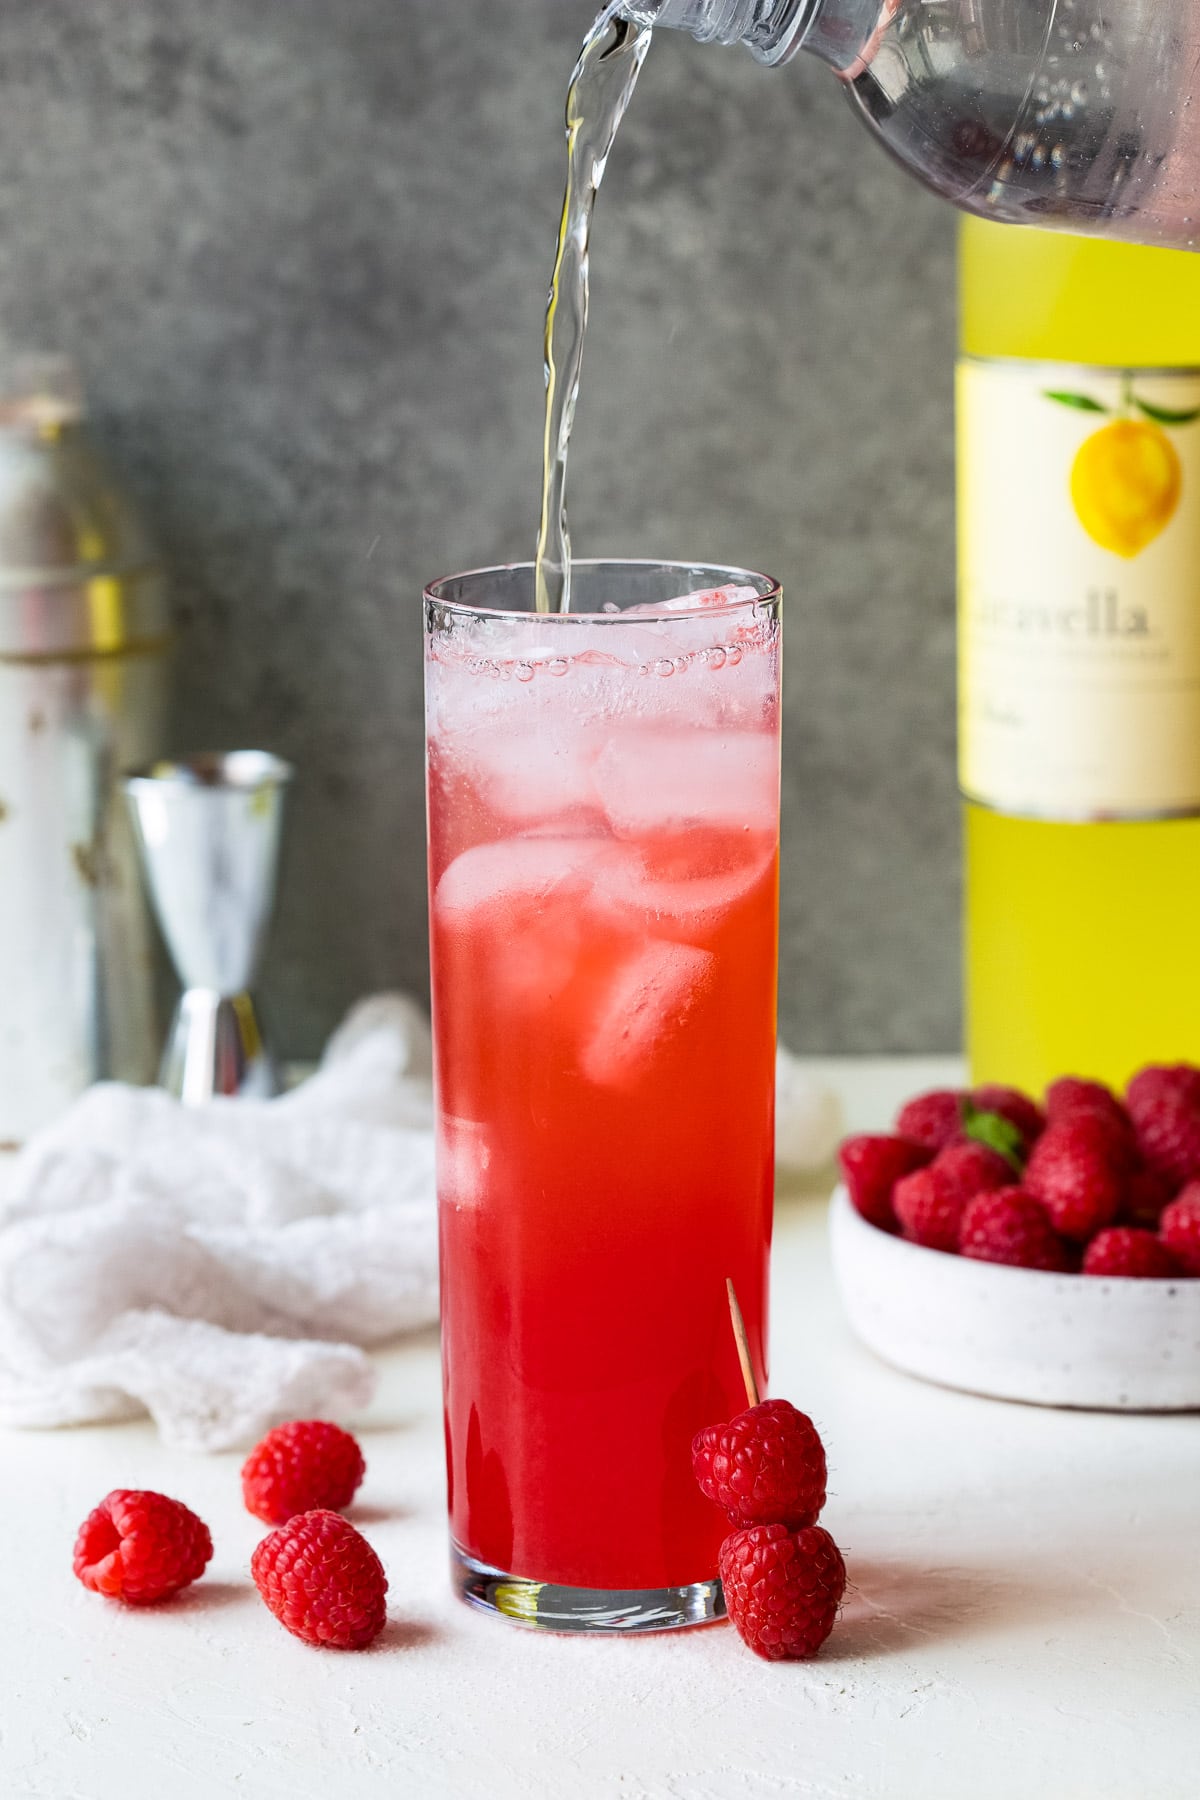 Club soda being poured into a raspberry limoncello cocktail.